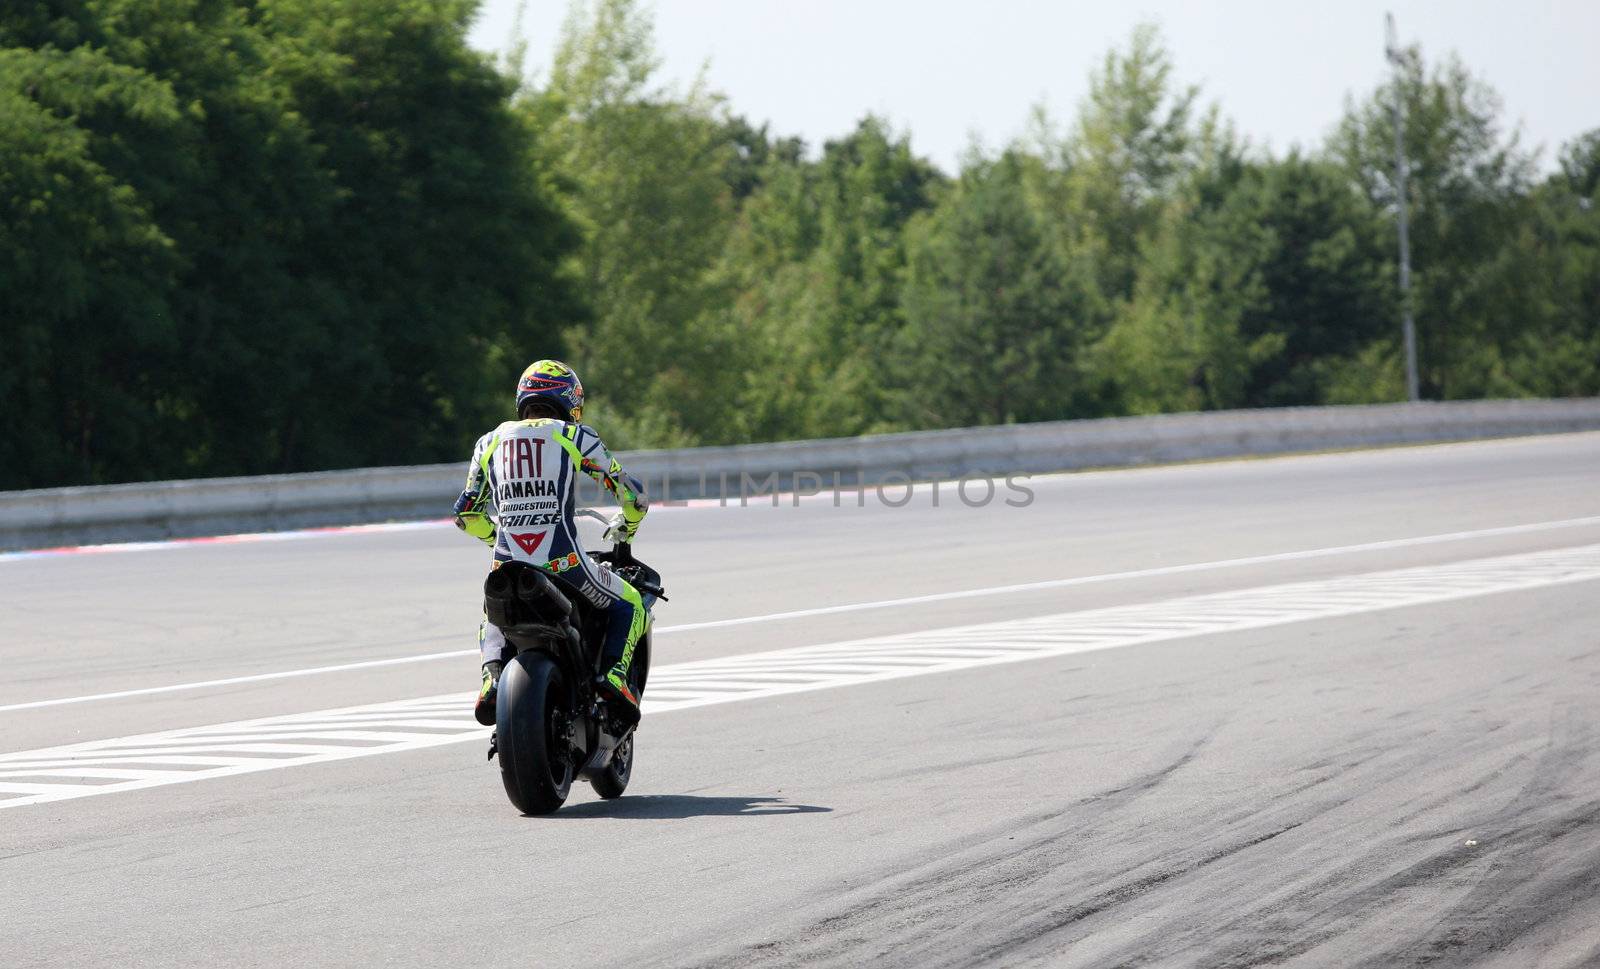 Valentino Rossi, who in early June in Italy Mugello GP suffered an fracture of the leg is testing at Masaryk Circuit on 12 July 2010, in Brno, Czech republic.